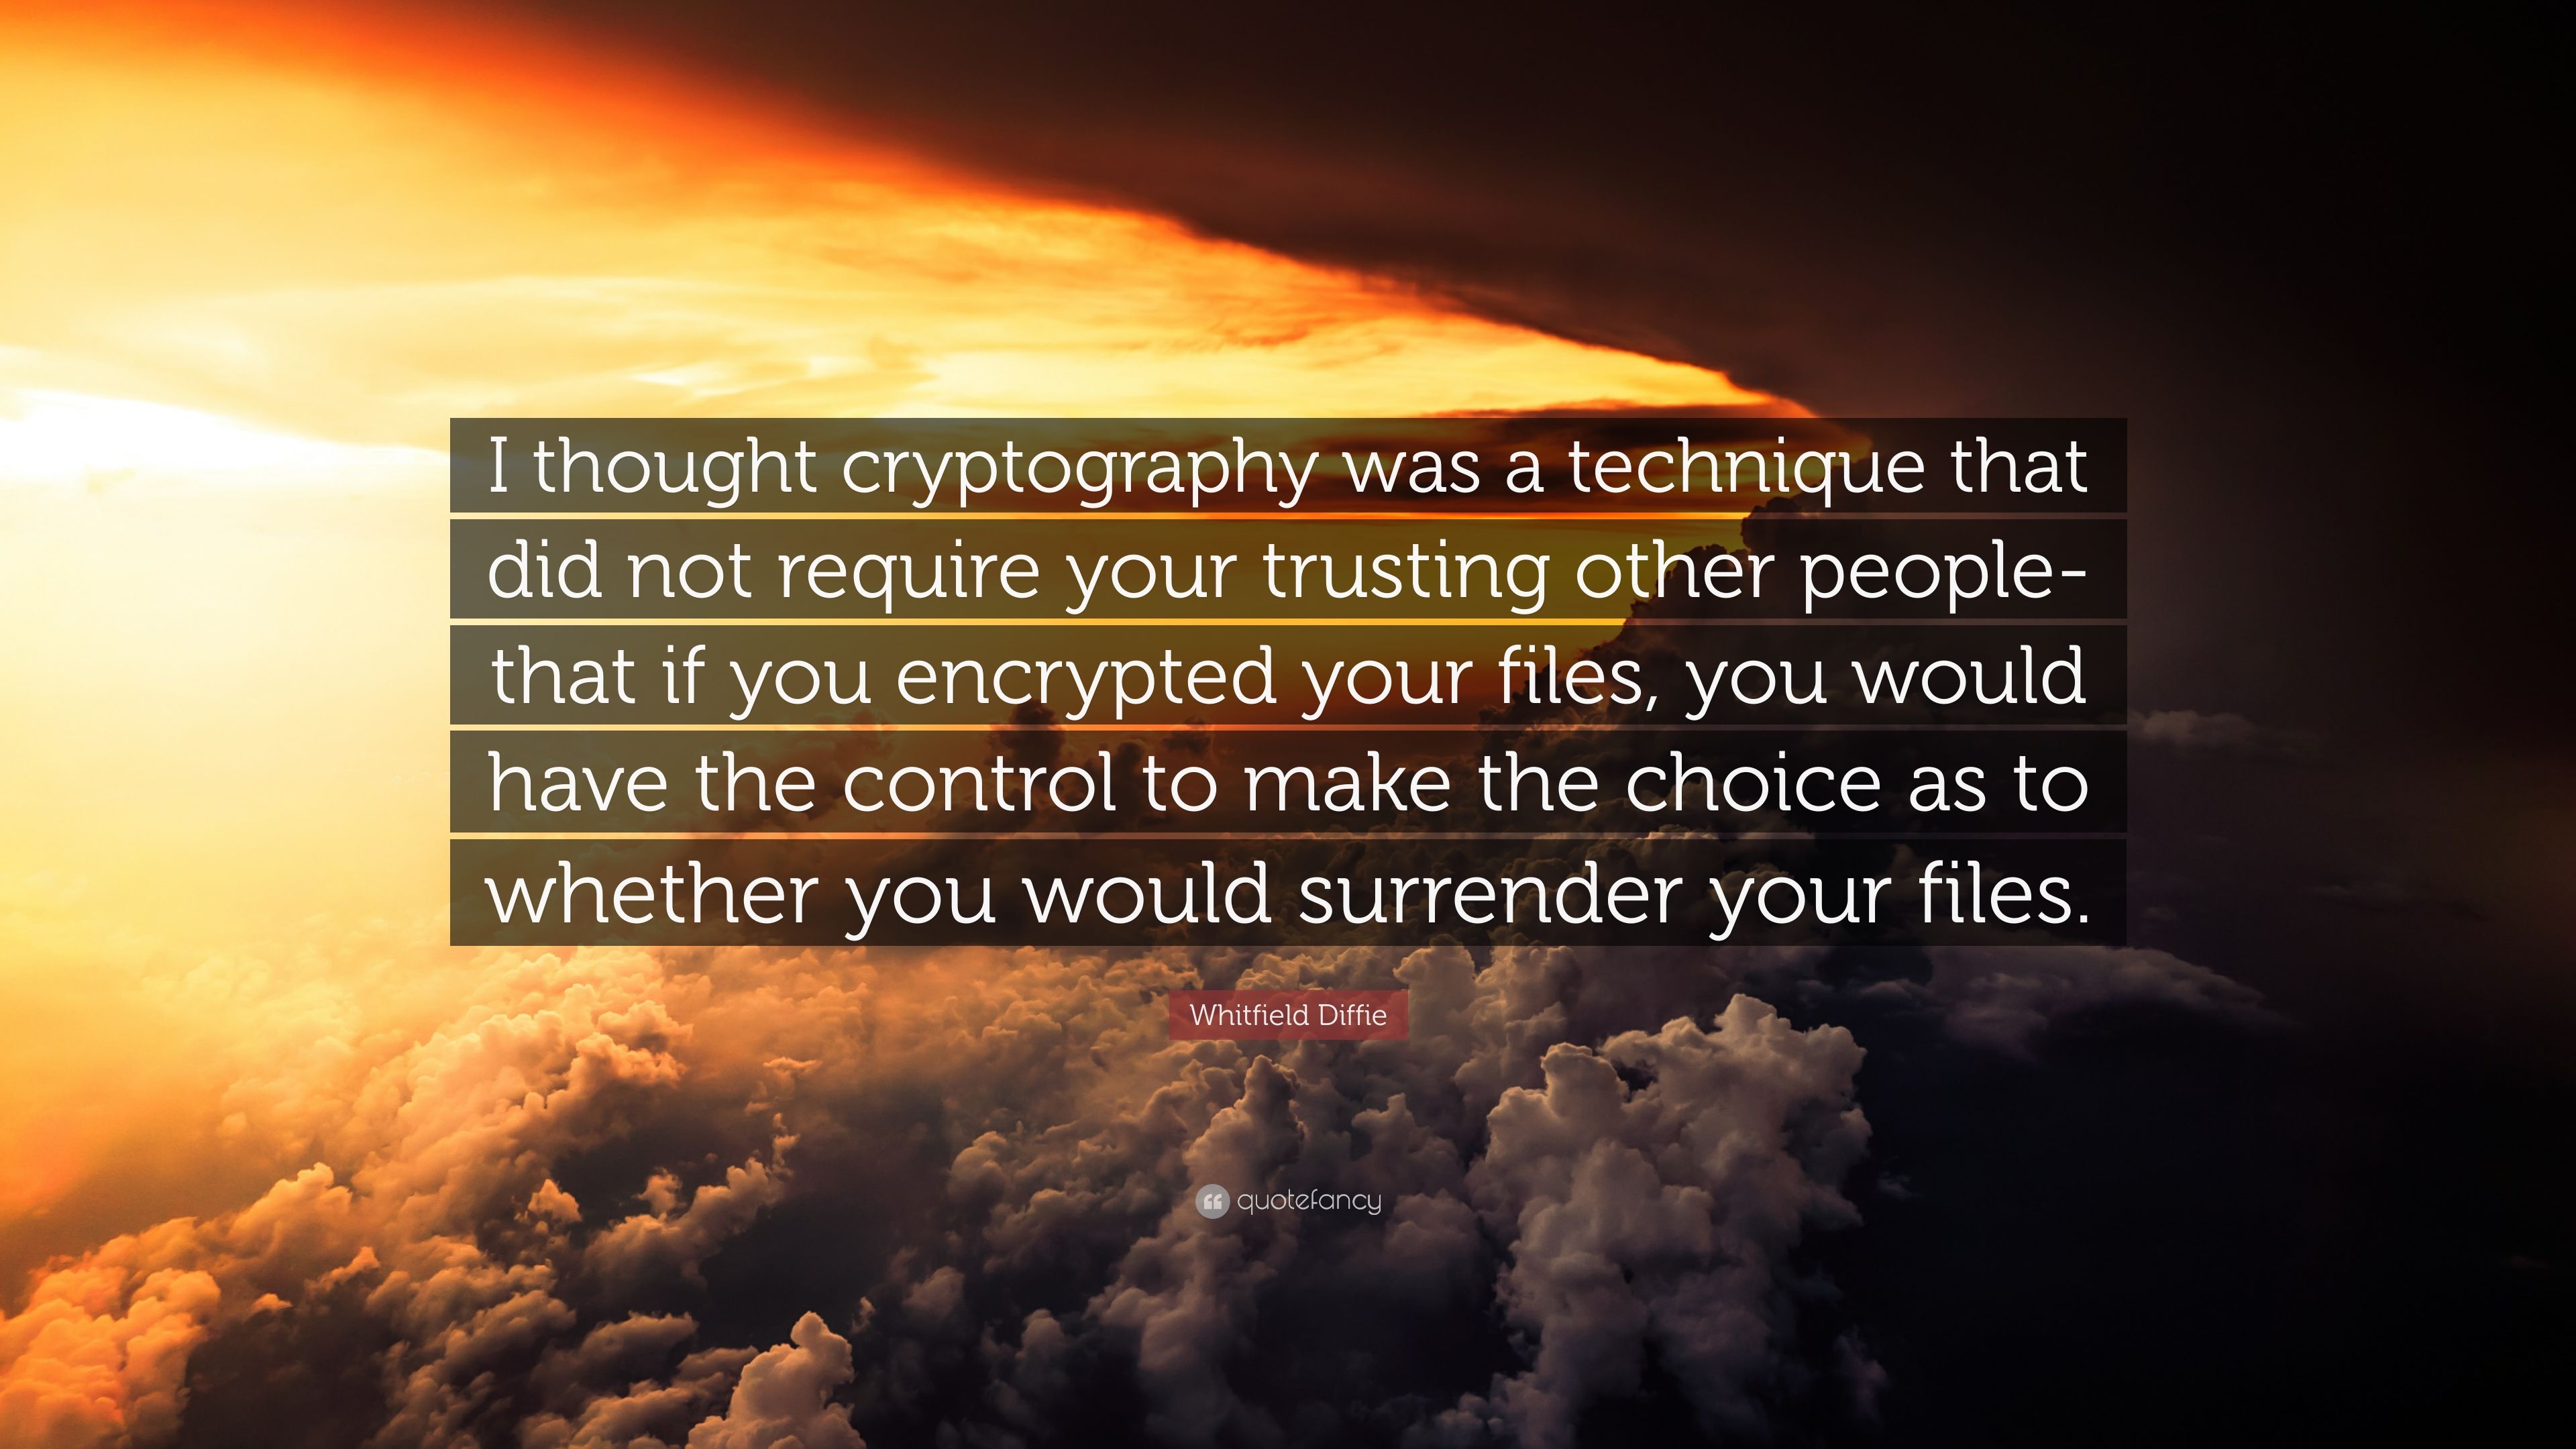 Whitfield Diffie Quote: “I Thought Cryptography Was A Technique That Did Not Require Your Trusting Other People That If You Encrypted Your Files, .”